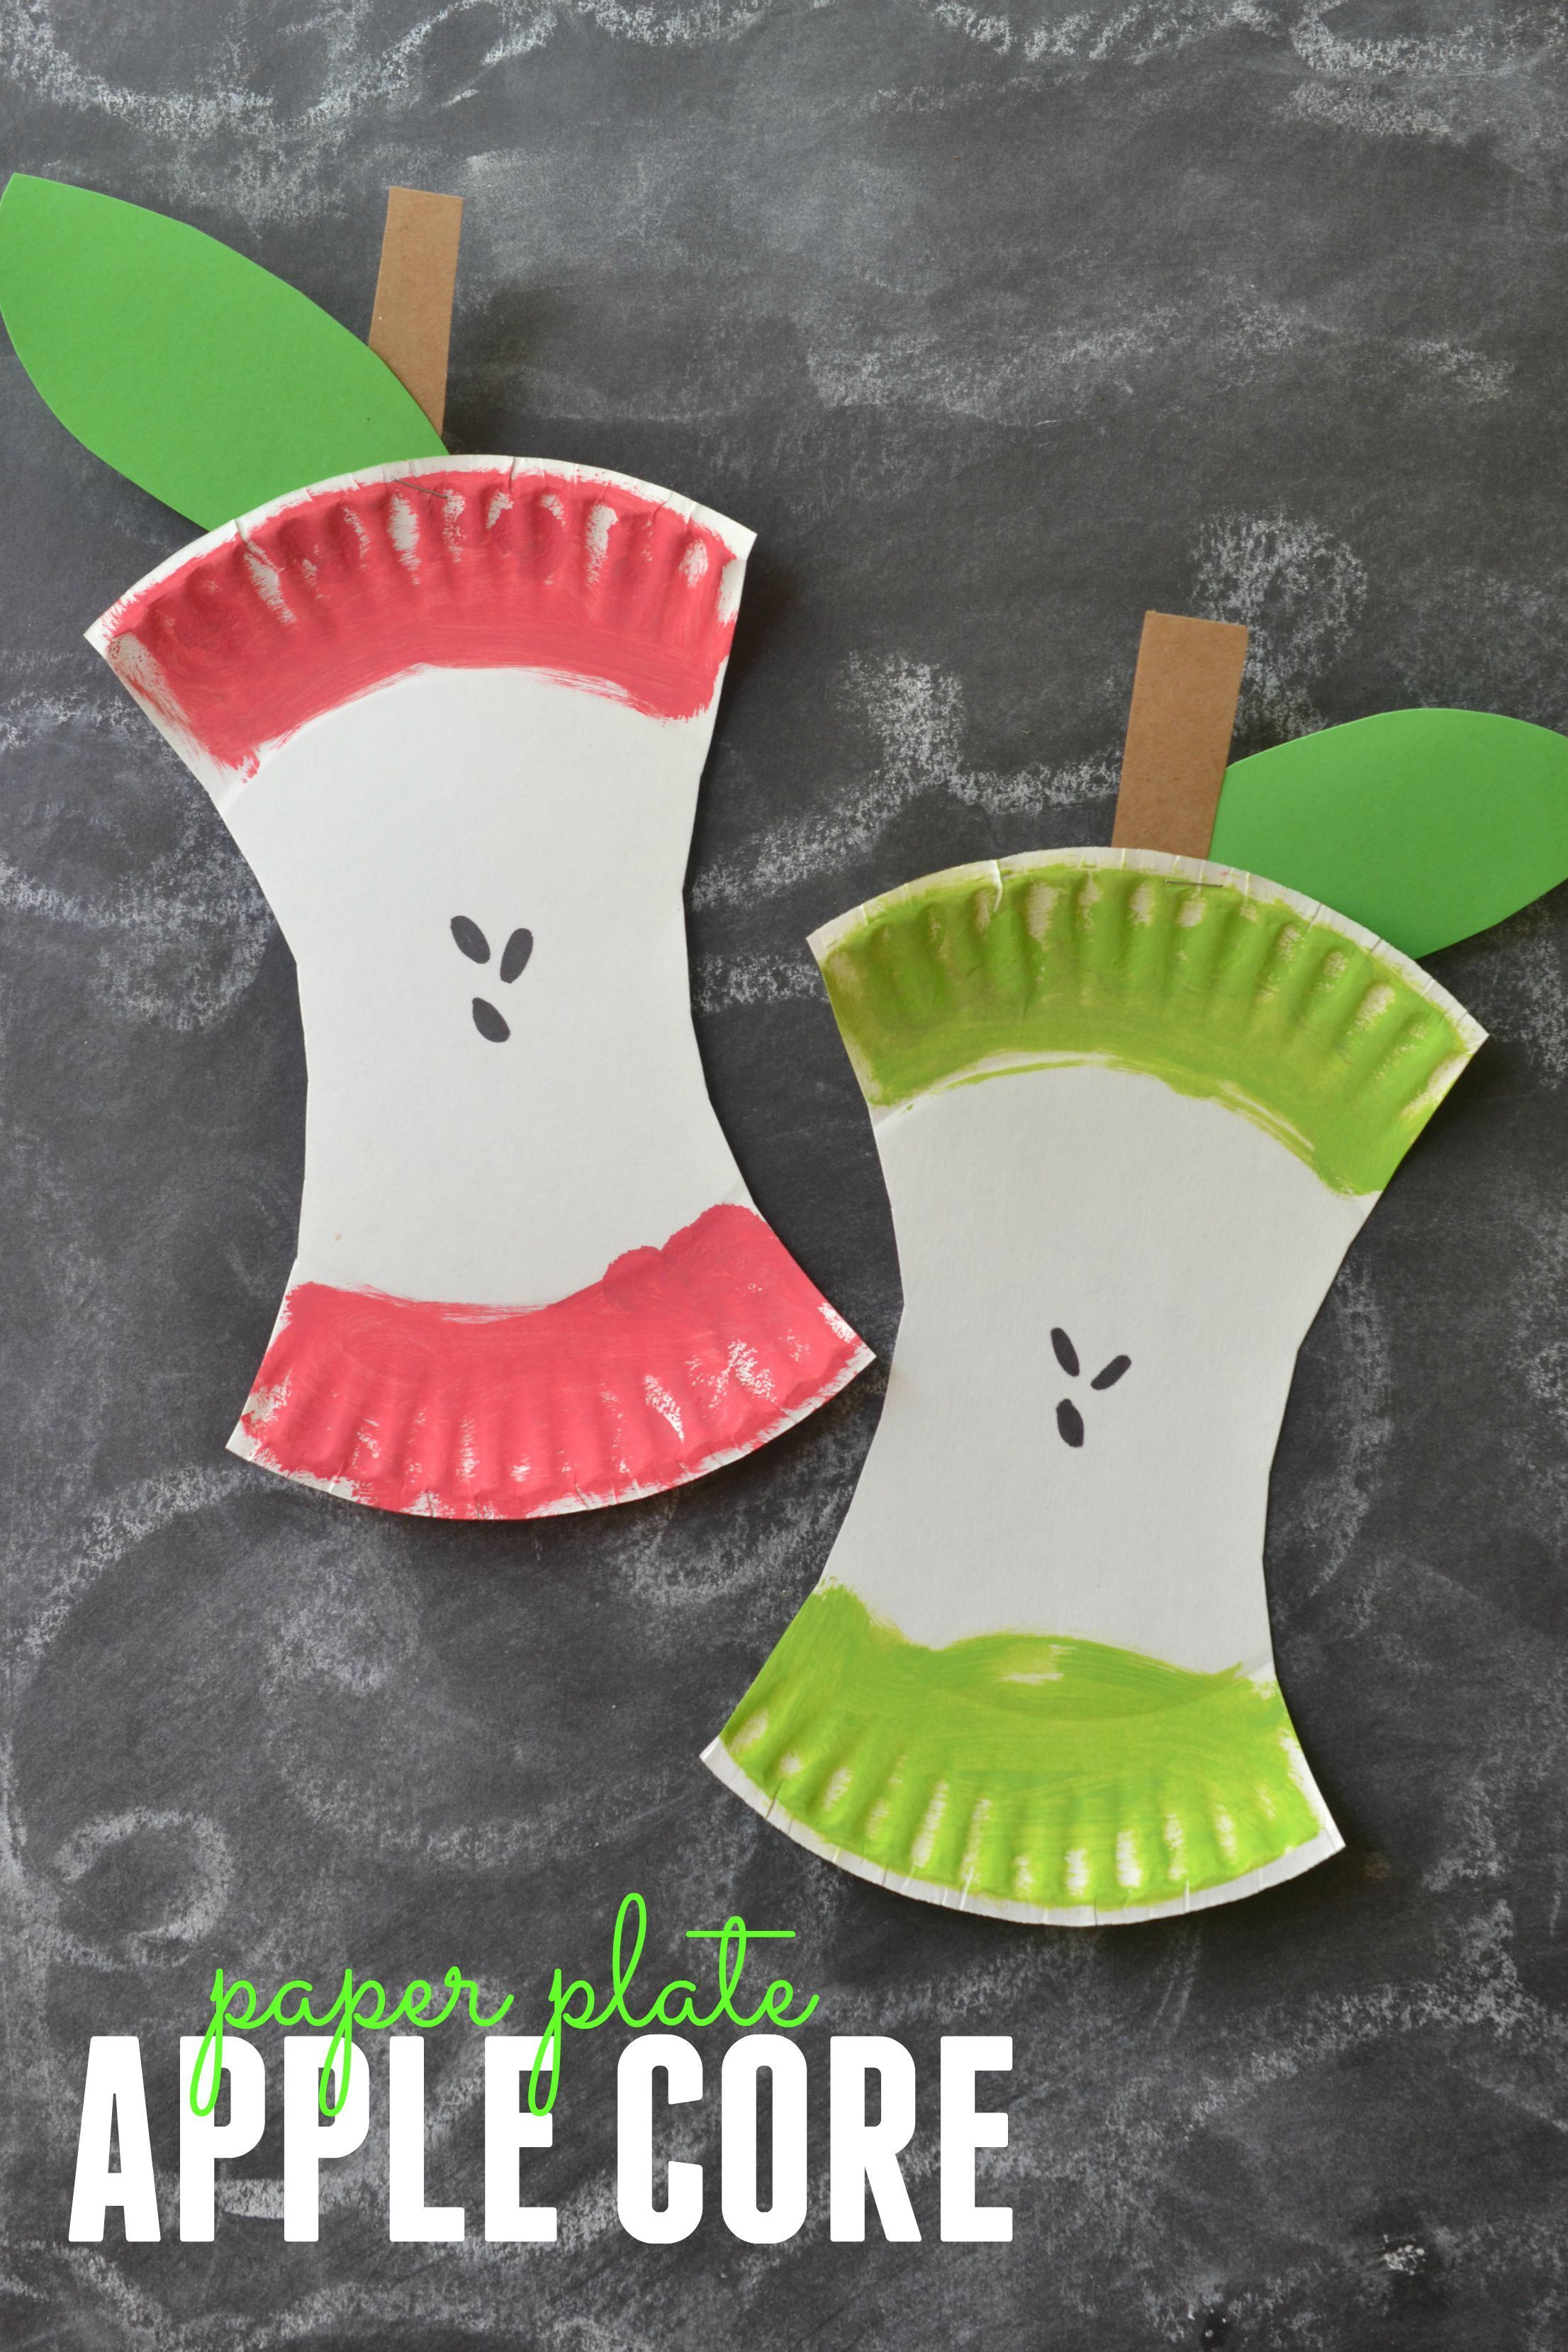 This easy kids craft project is perfect for back-to-school or fall decor! Learn how and get everything you need to make this paper